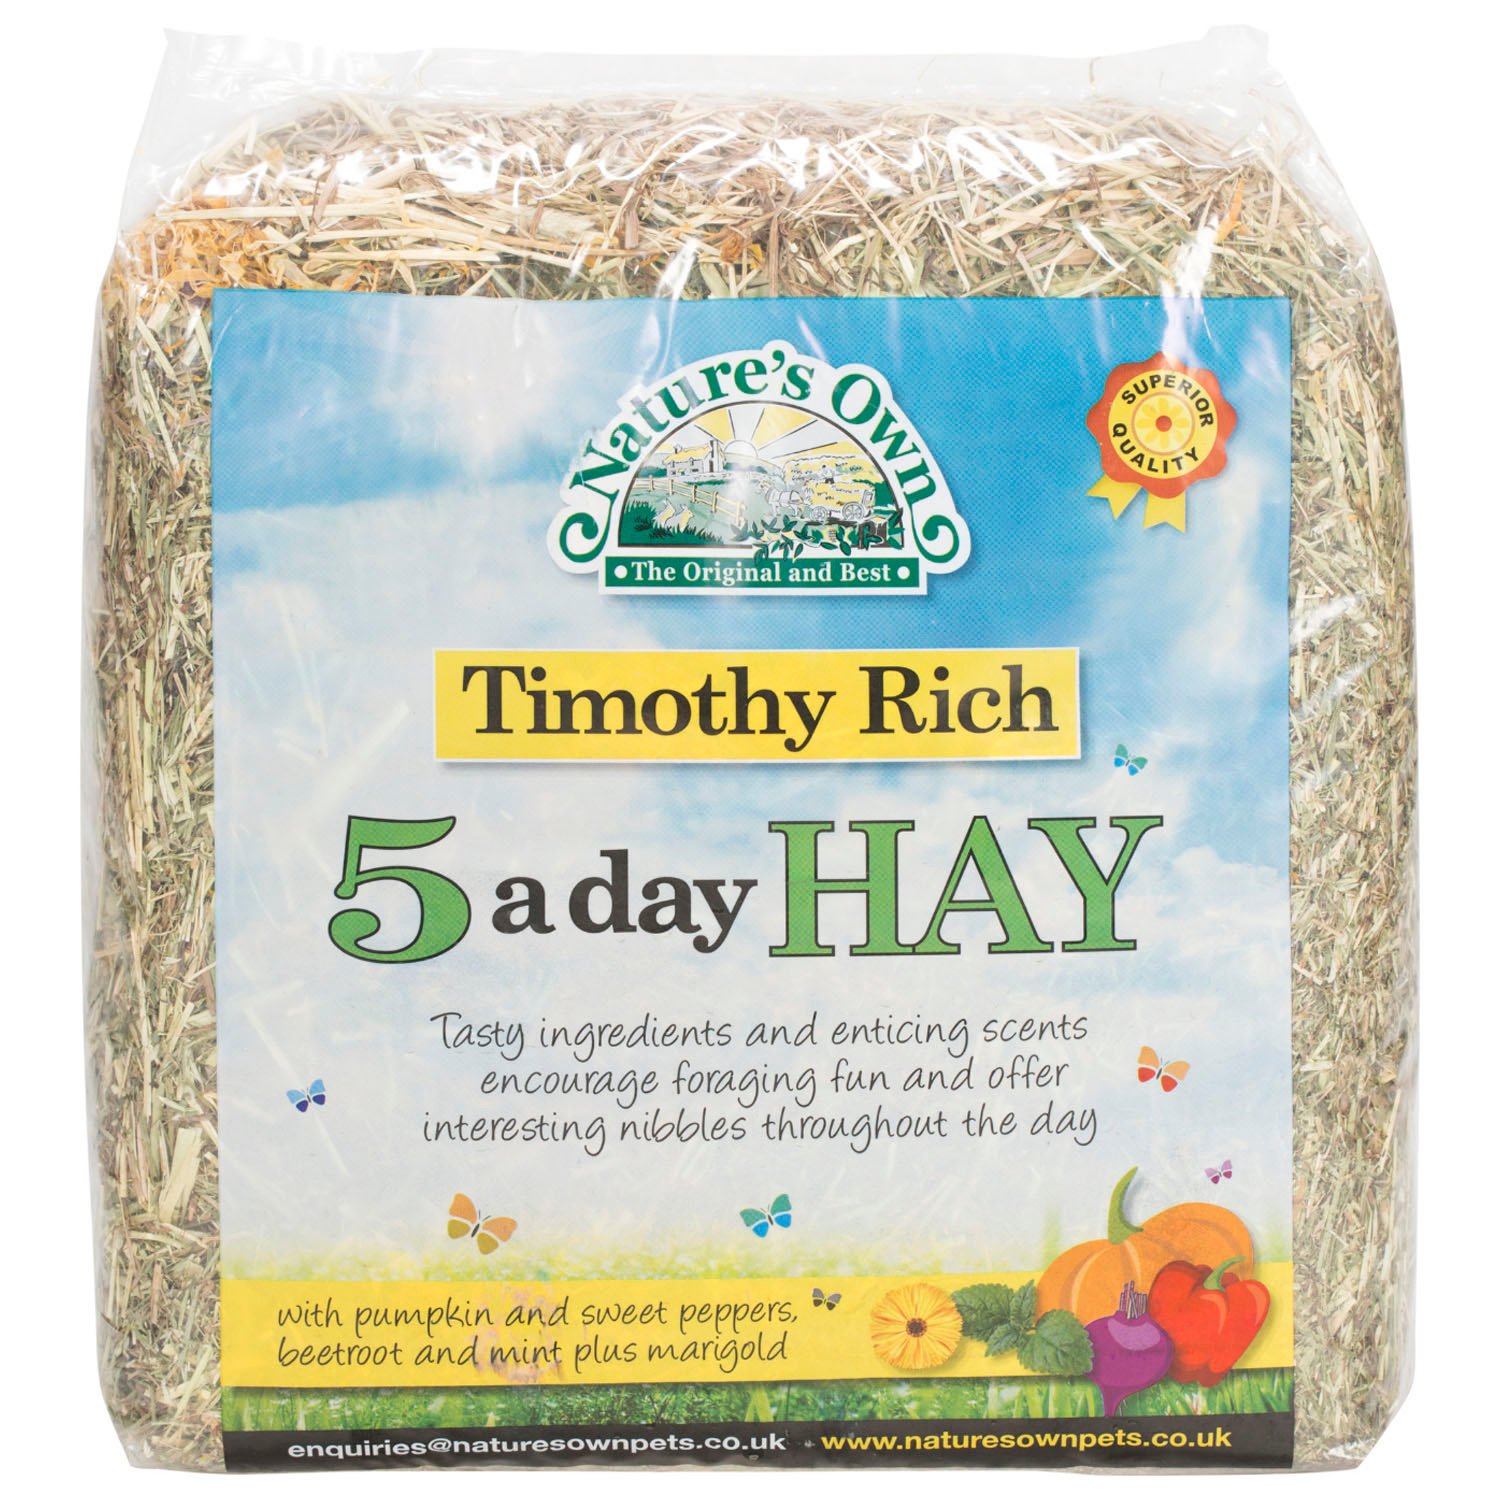 Natures Own Timothy Rich 5 A Day Hay Pet Food Image 1